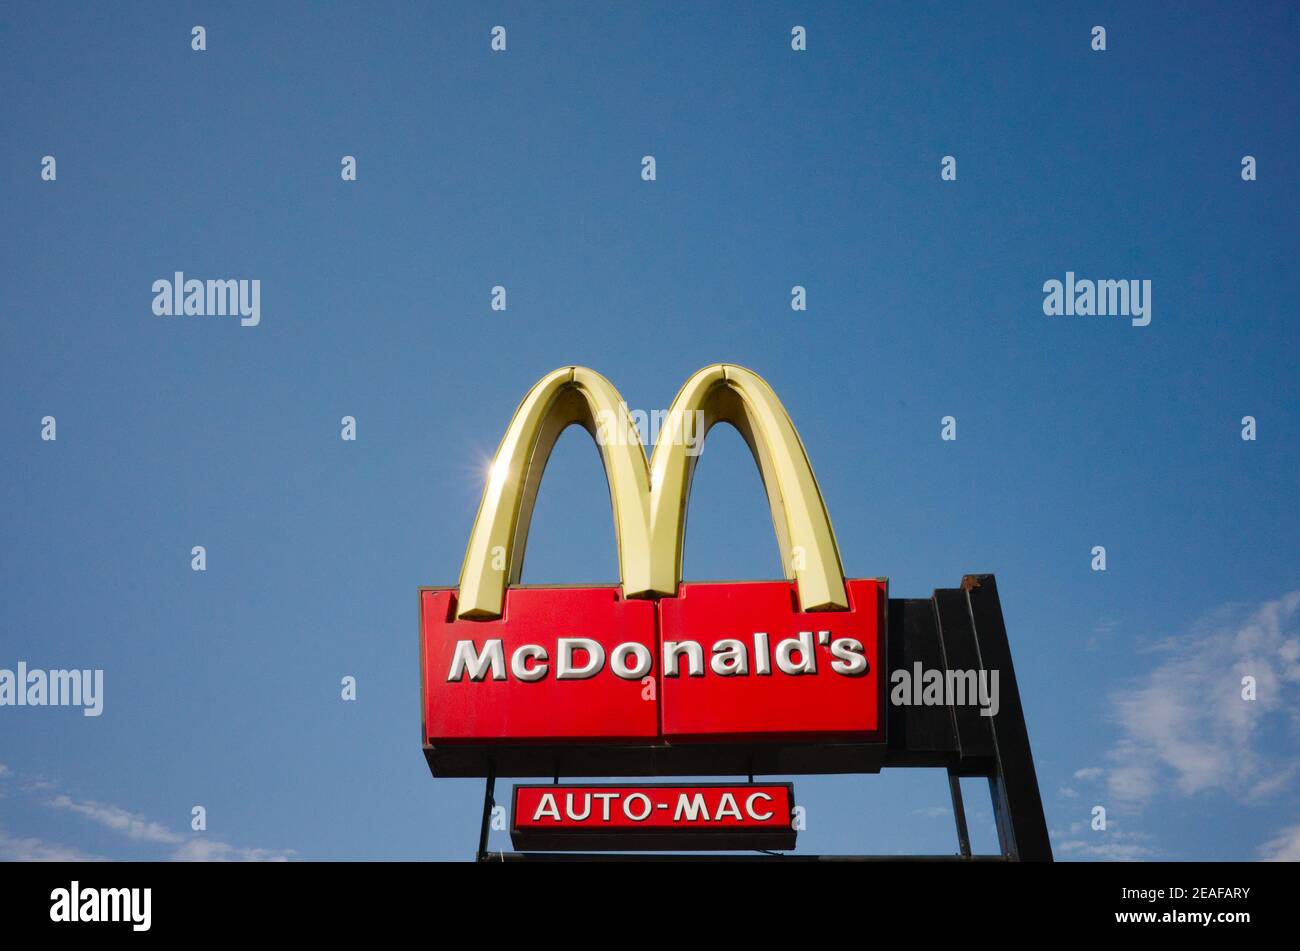 Buenos Aires, Argentina - January, 2020: Big Mcdonalds logo outside against blue sky. Auto mac sign under it. Stock Photo